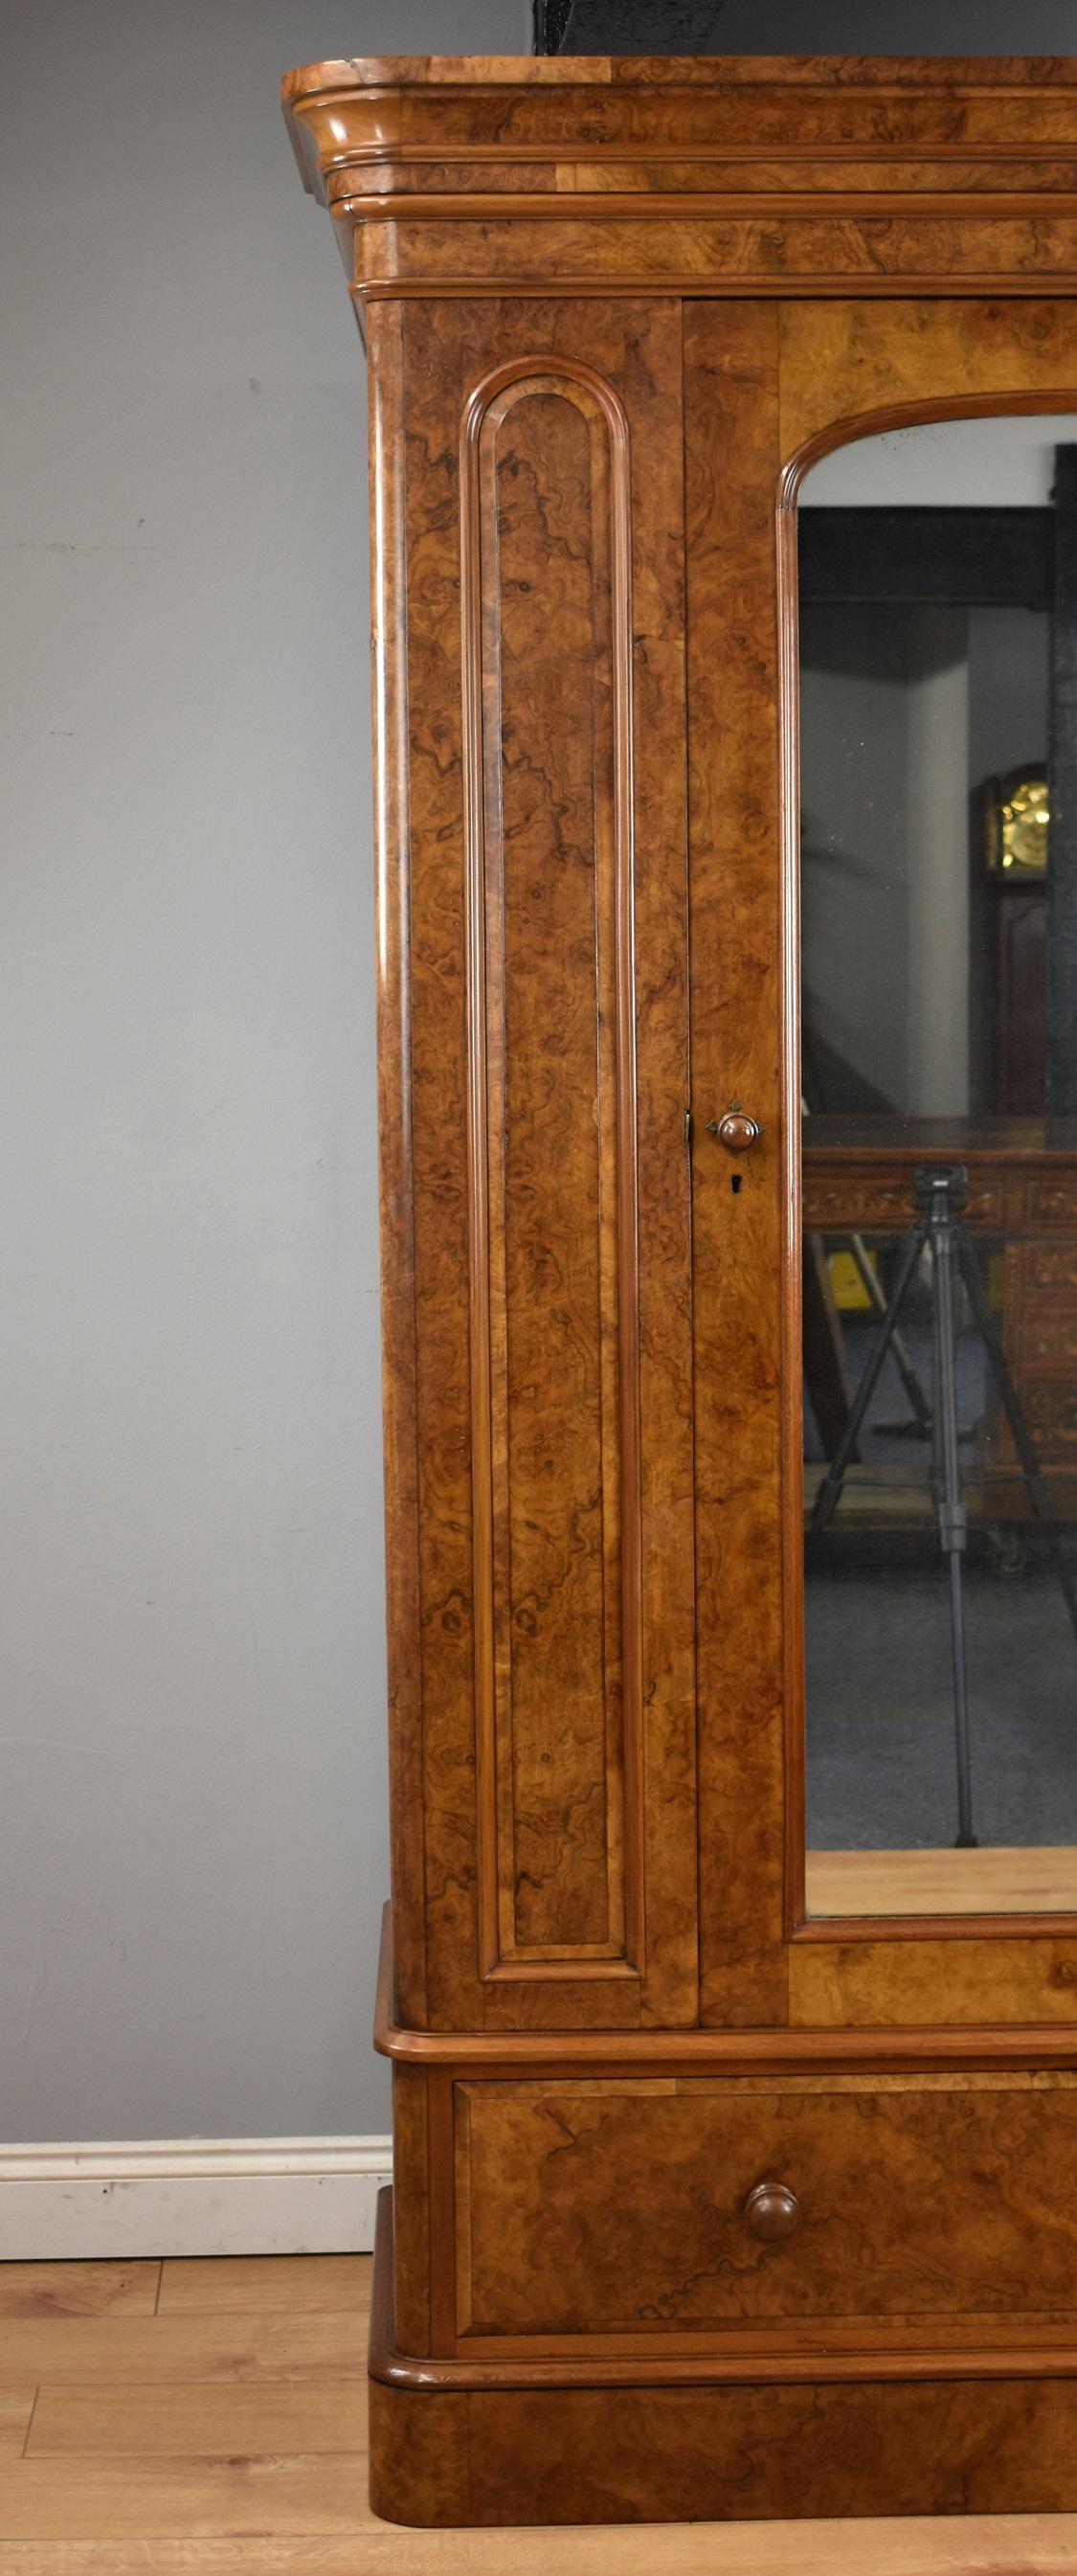 Fine quality Victorian burr walnut wardrobe by Maple & Co in good condition with having a stepped and flared cornice above single mirror door complete with original mercury glass flanked by panels either side above a single drawer with turned